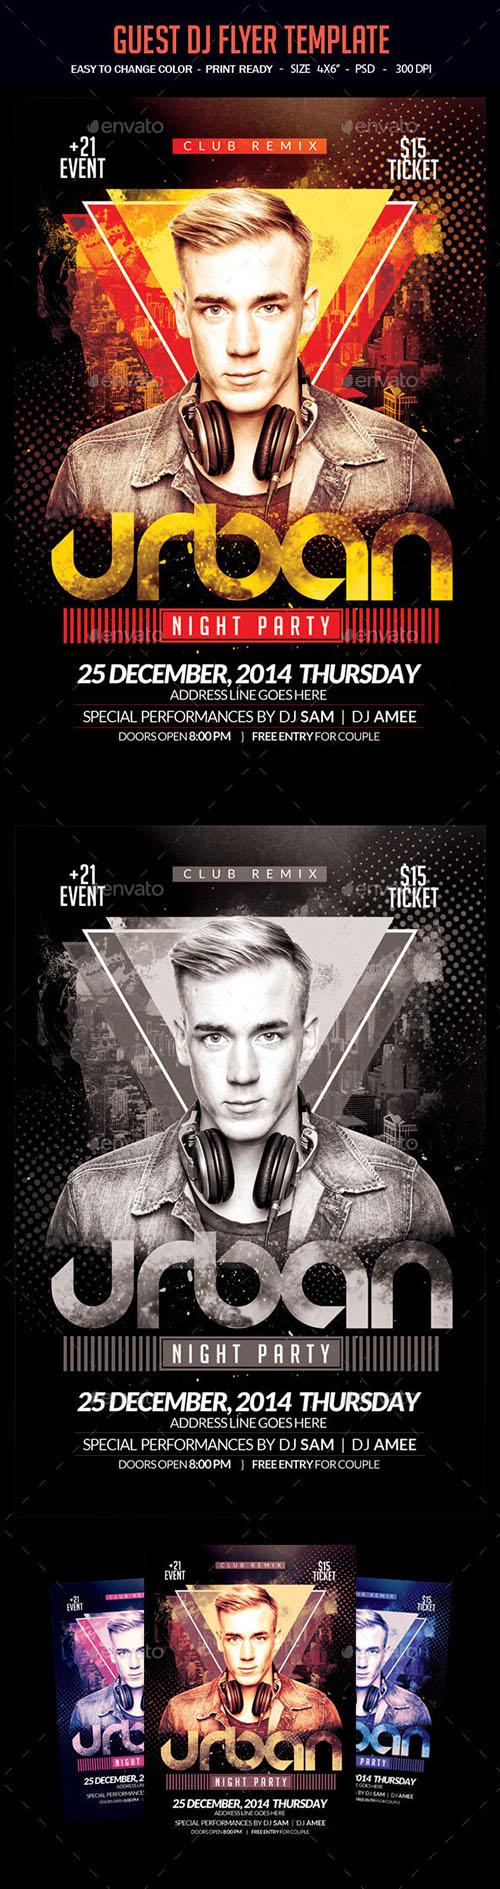 Graphicriver - Urban Night Party Flyer Template 14422936